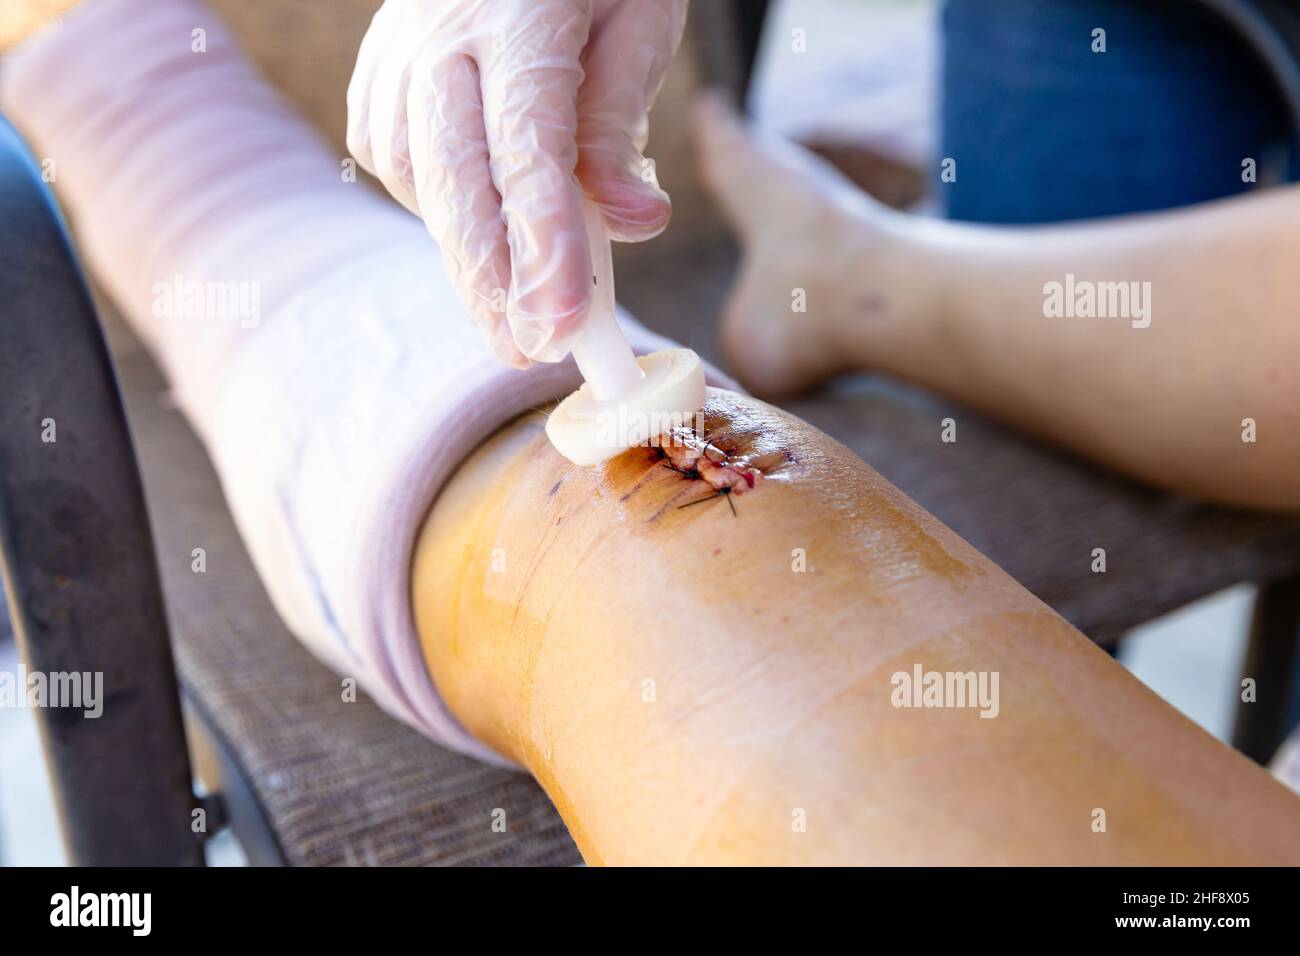 Cleaning wound and stitches after surgery Stock Photo